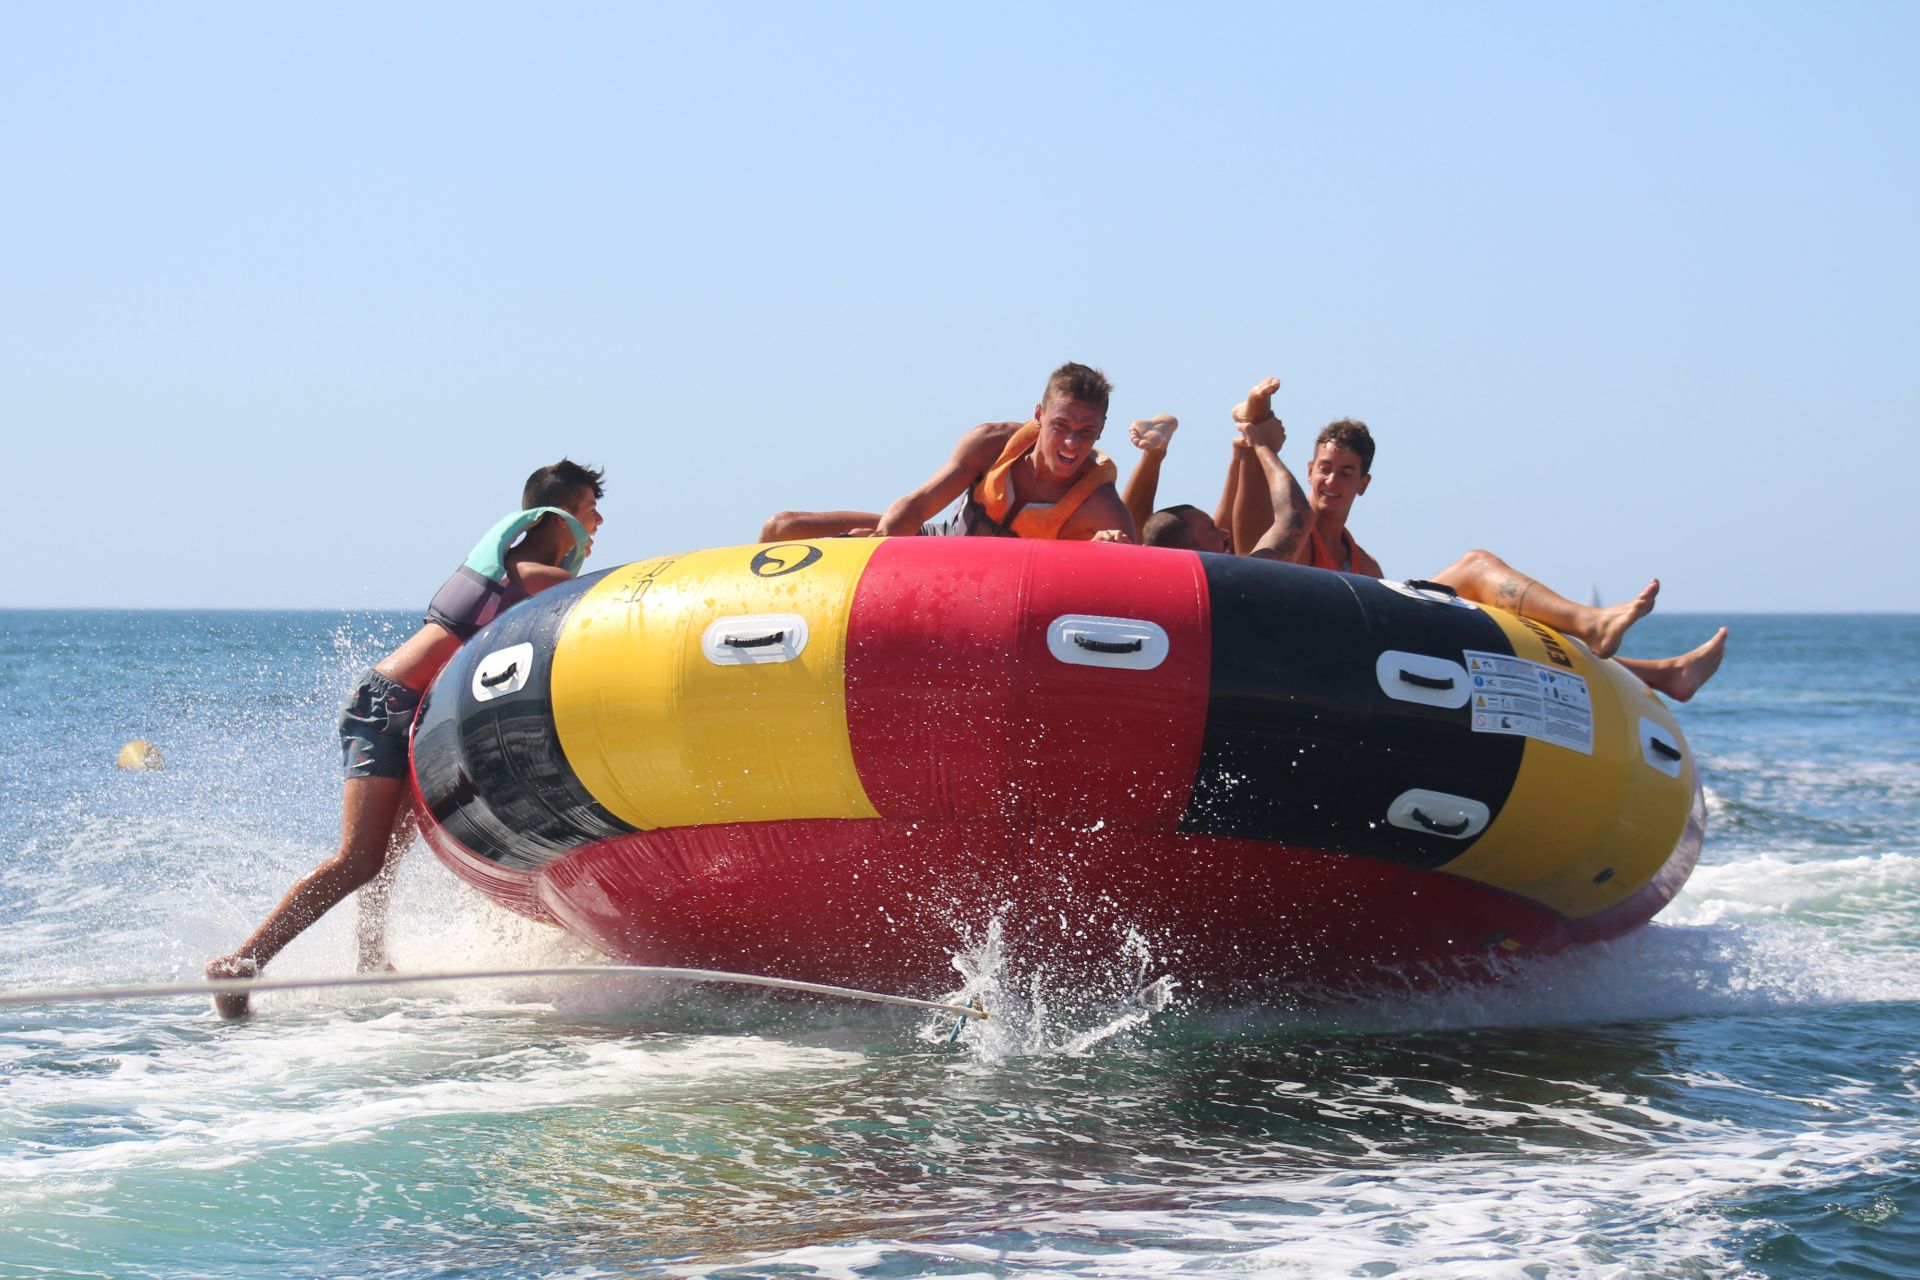 Experience Watersports Anew: Exciting Tubes for Older Users